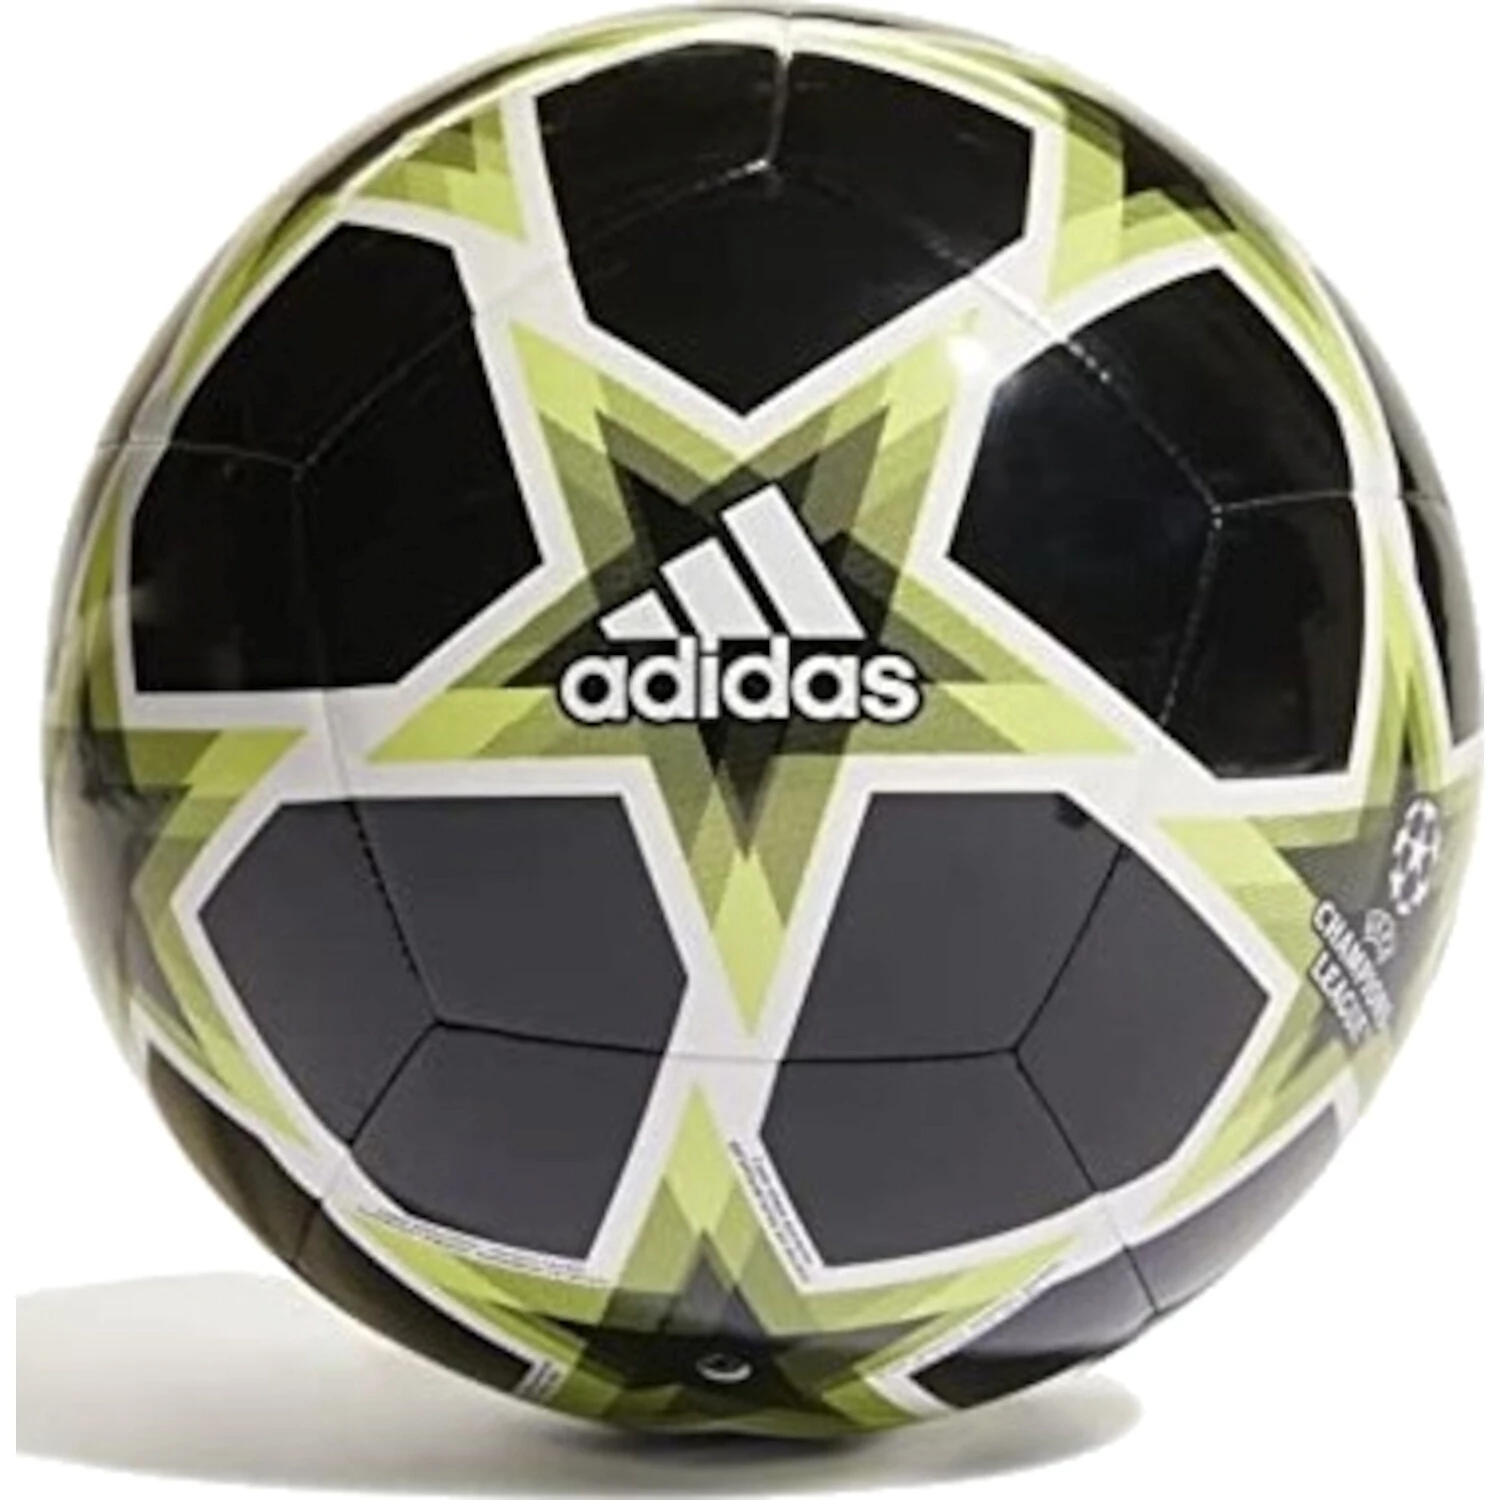 UEFA CHAMPIONS LEAGUE REAL MADRID VOETBAL HE3778 wbsport.nl